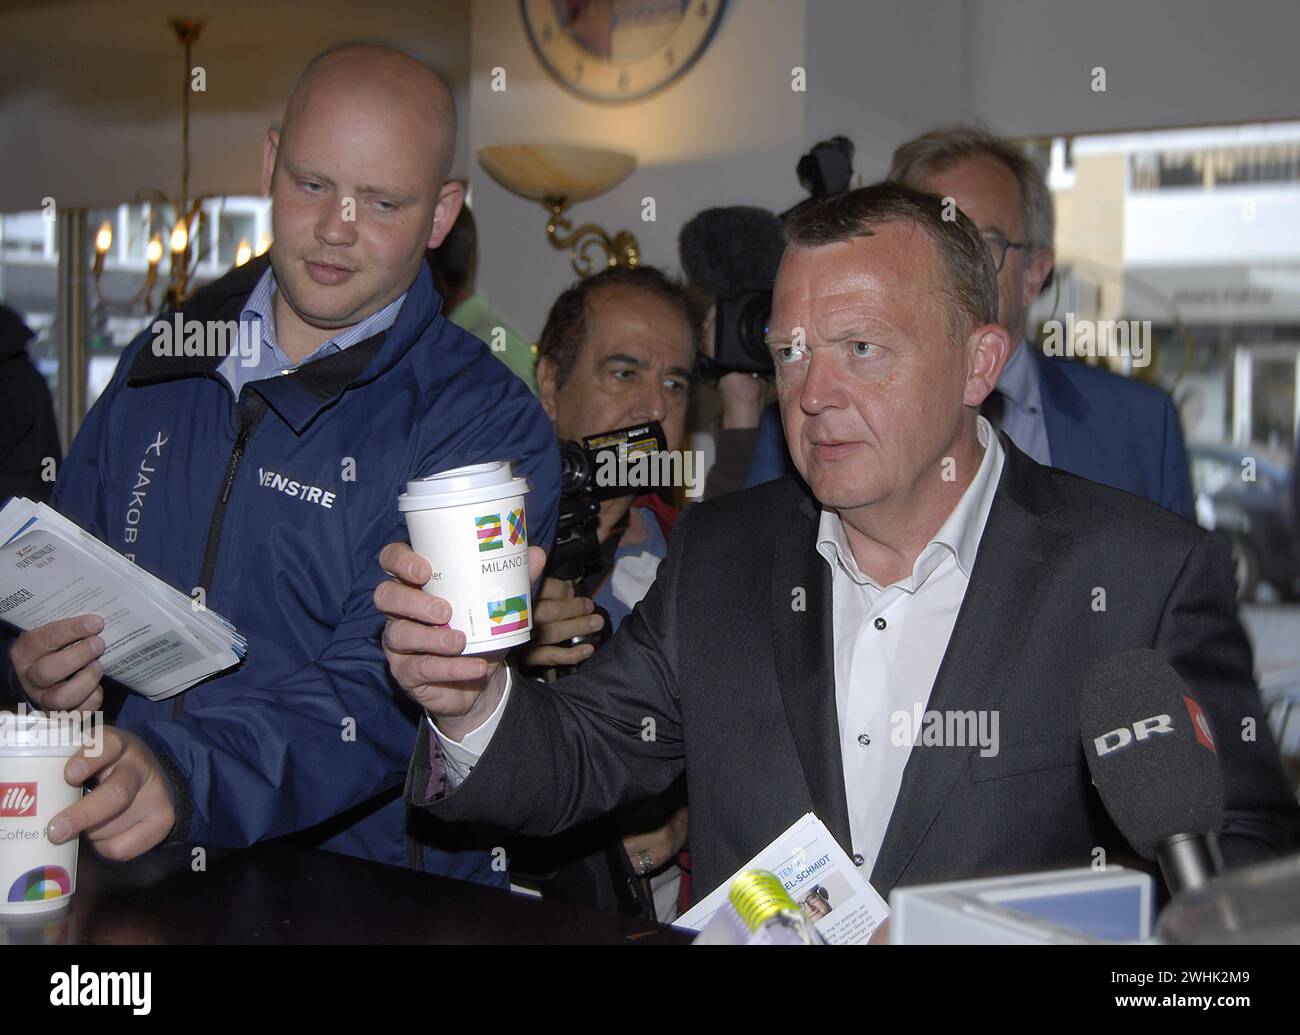 LYNGBY/COPENHAGEN/DENMARK. 15 JUNE 2015  Danish liberal party leader and prime minister cadidate former prime minister Lars Lokke Rasmussen joint road elections compaign for local parliament candidate Jakob Engel-Schmidt at lyngby districts Stock Photo